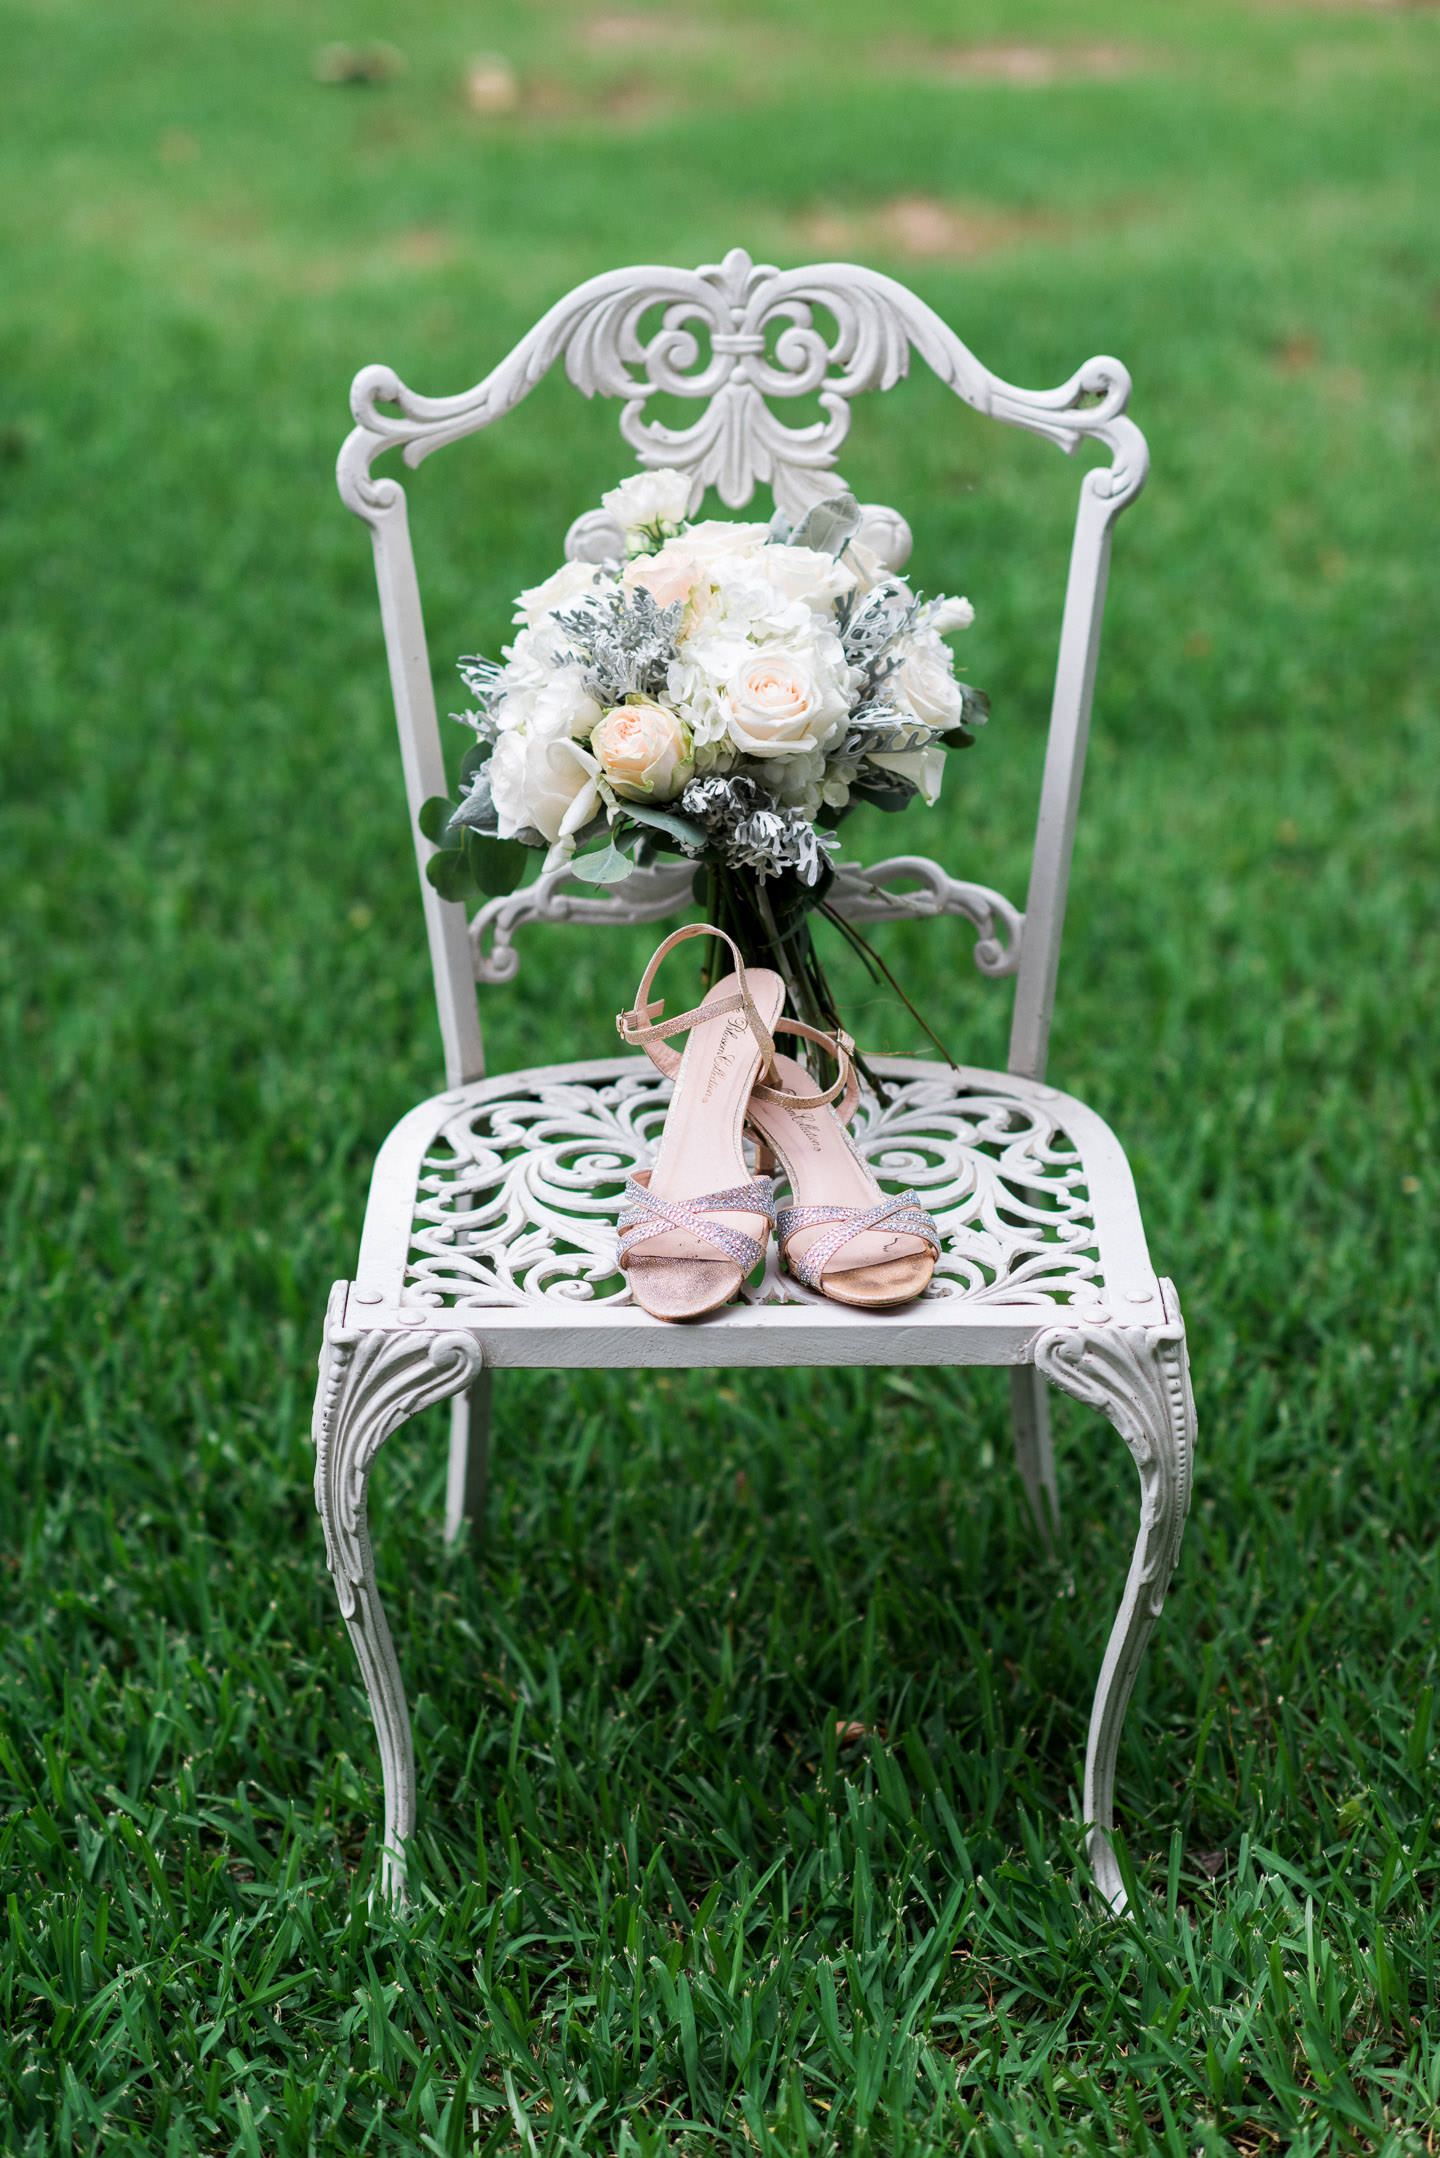 Bride's shoes and bouquet on white chair at Jackson, Mississippi wedding